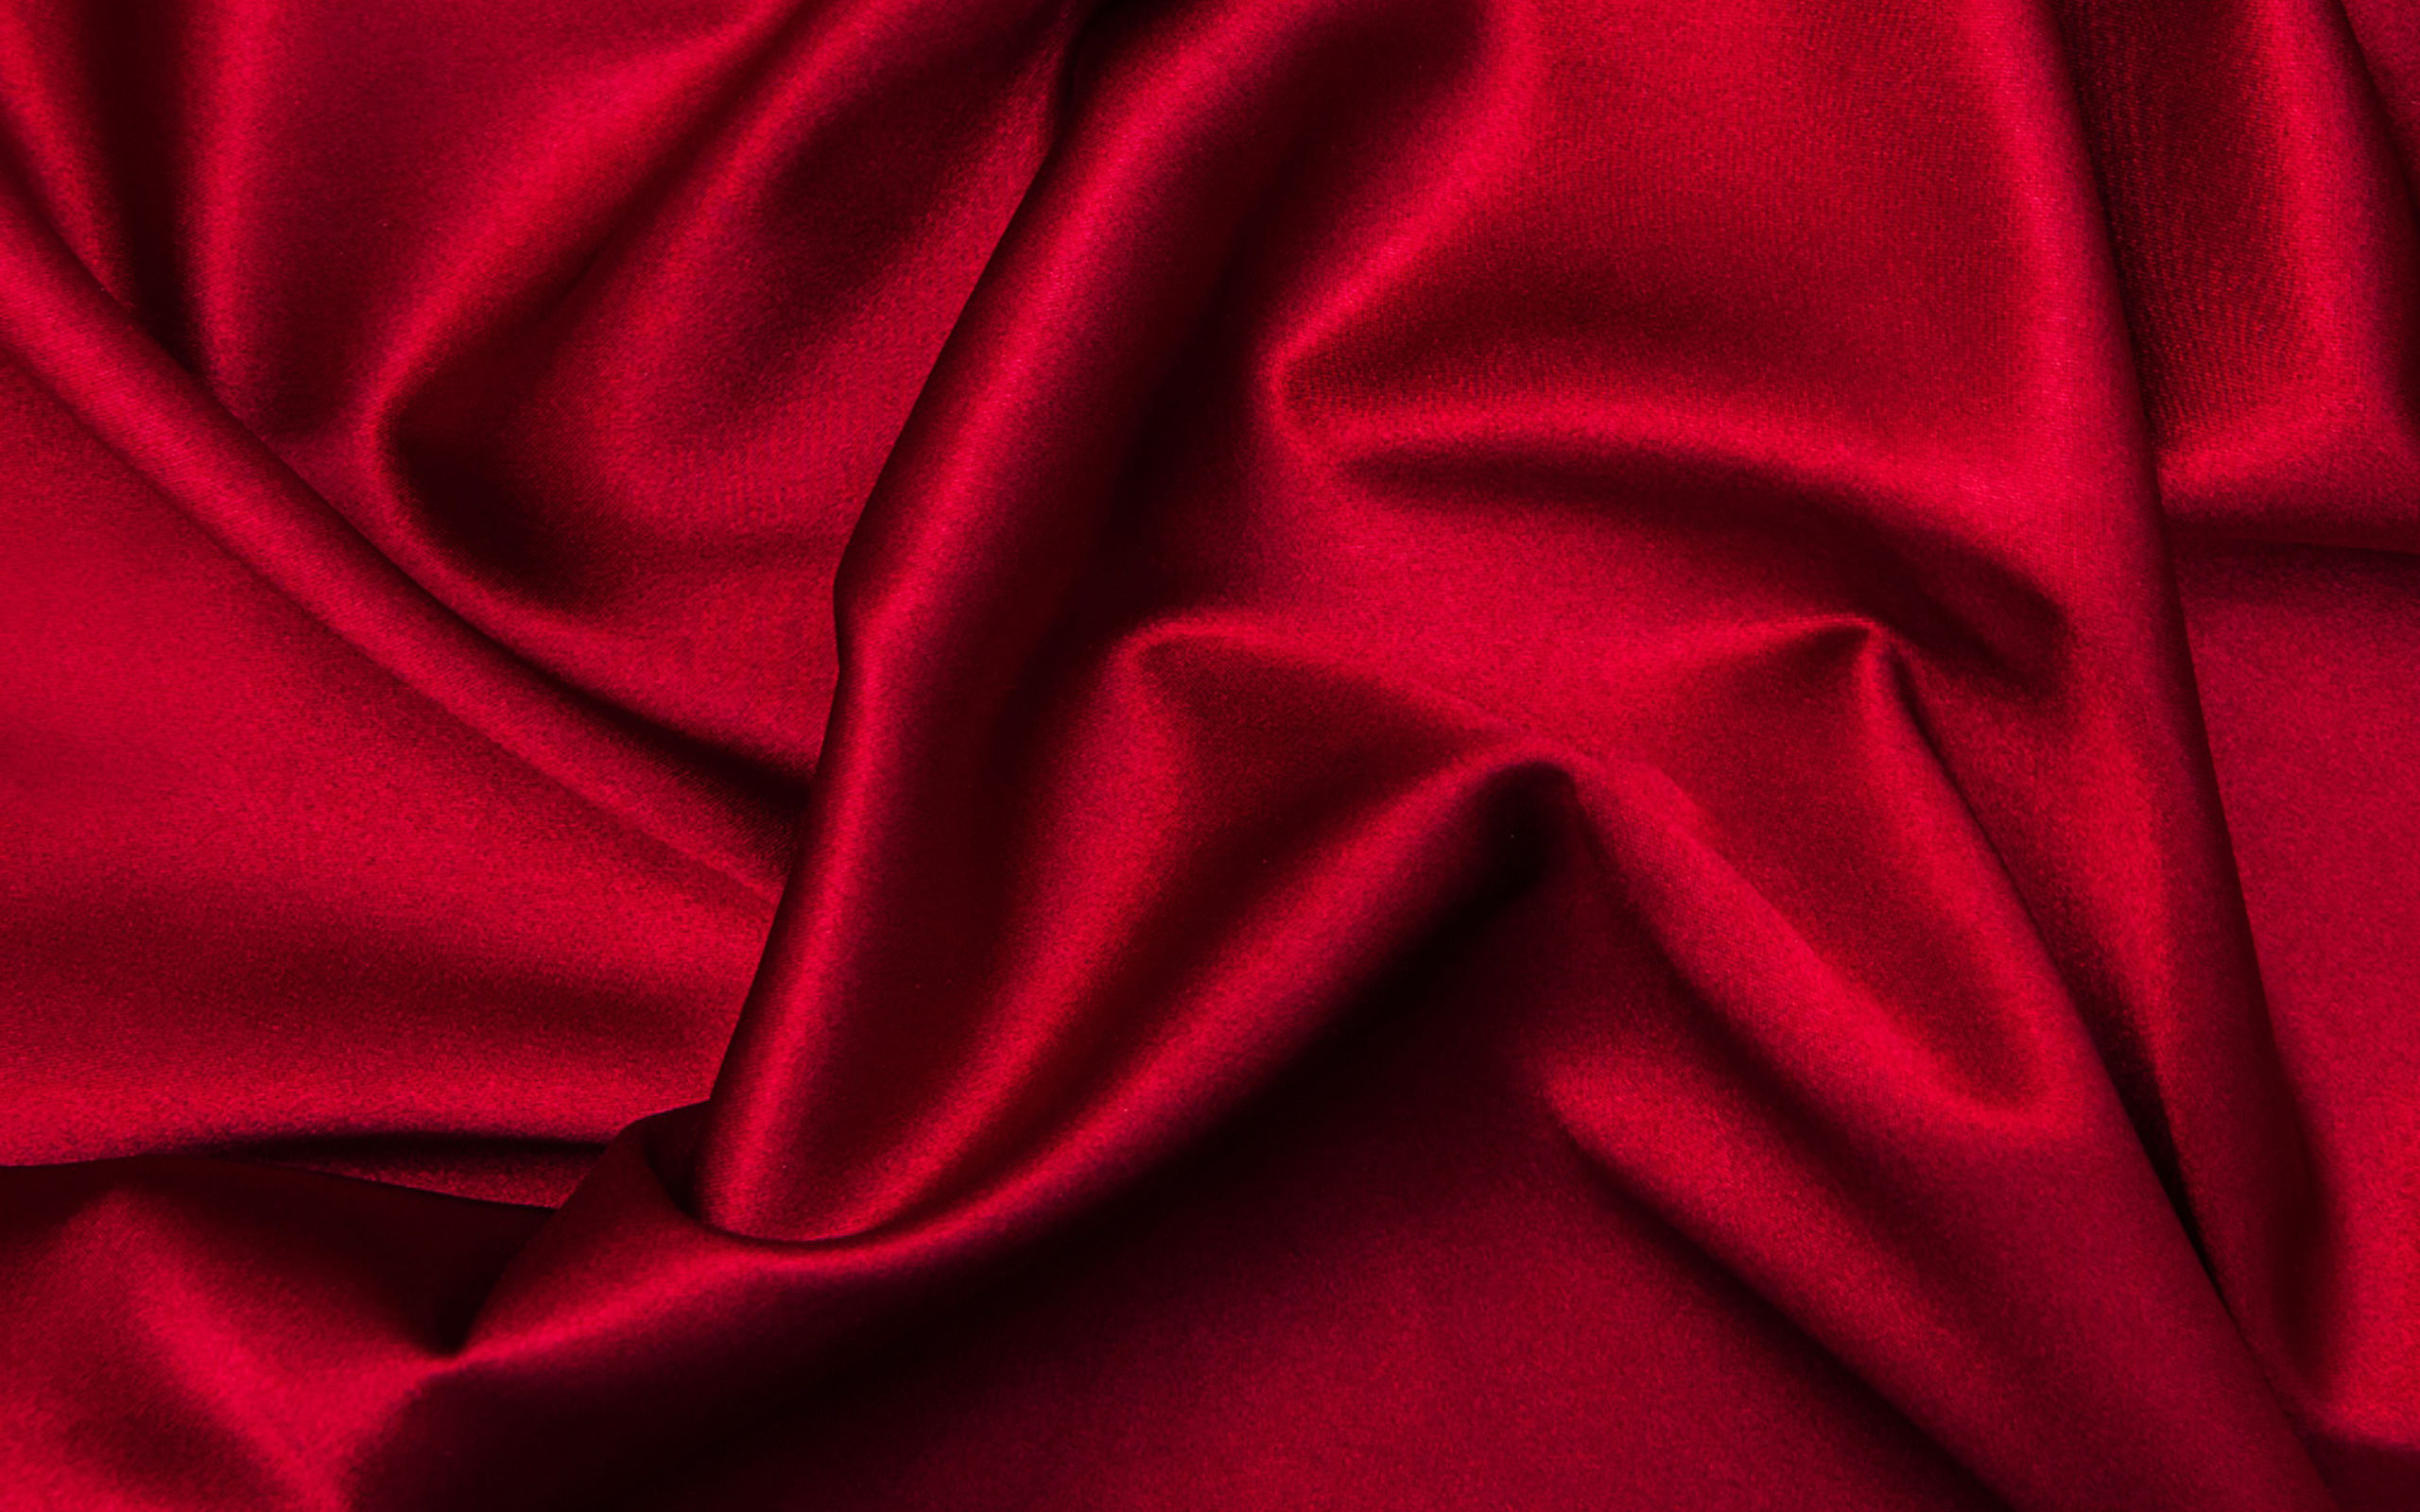 Download wallpaper ed silk texture, waves silk texture, red fabric texture, fabric red background for desktop with resolution 2560x1600. High Quality HD picture wallpaper